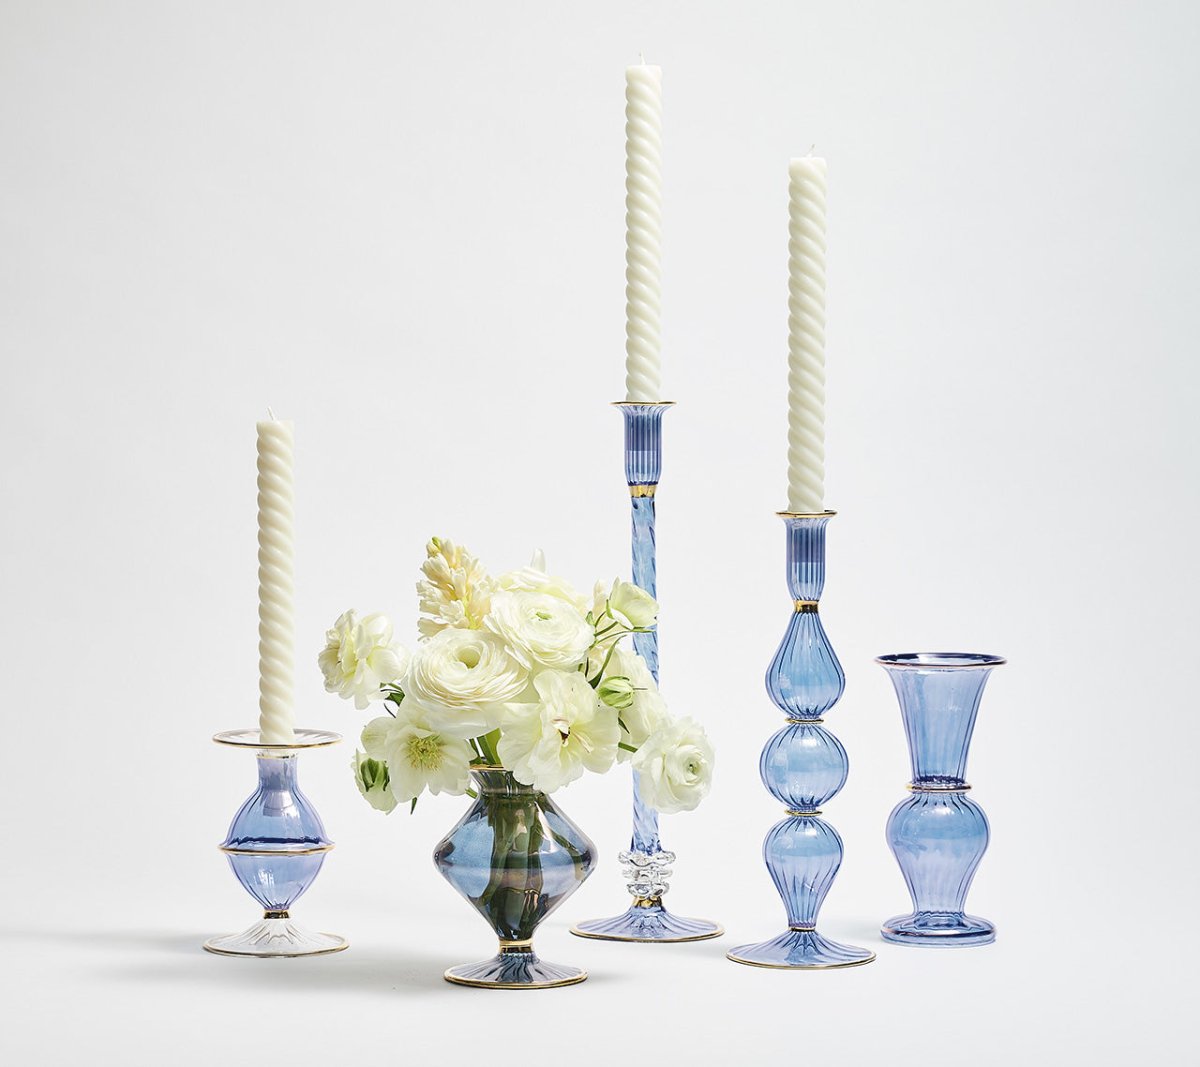 Everything You Should Know About Styling Candle Holders for Candlesticks - Kim Seybert, Inc.